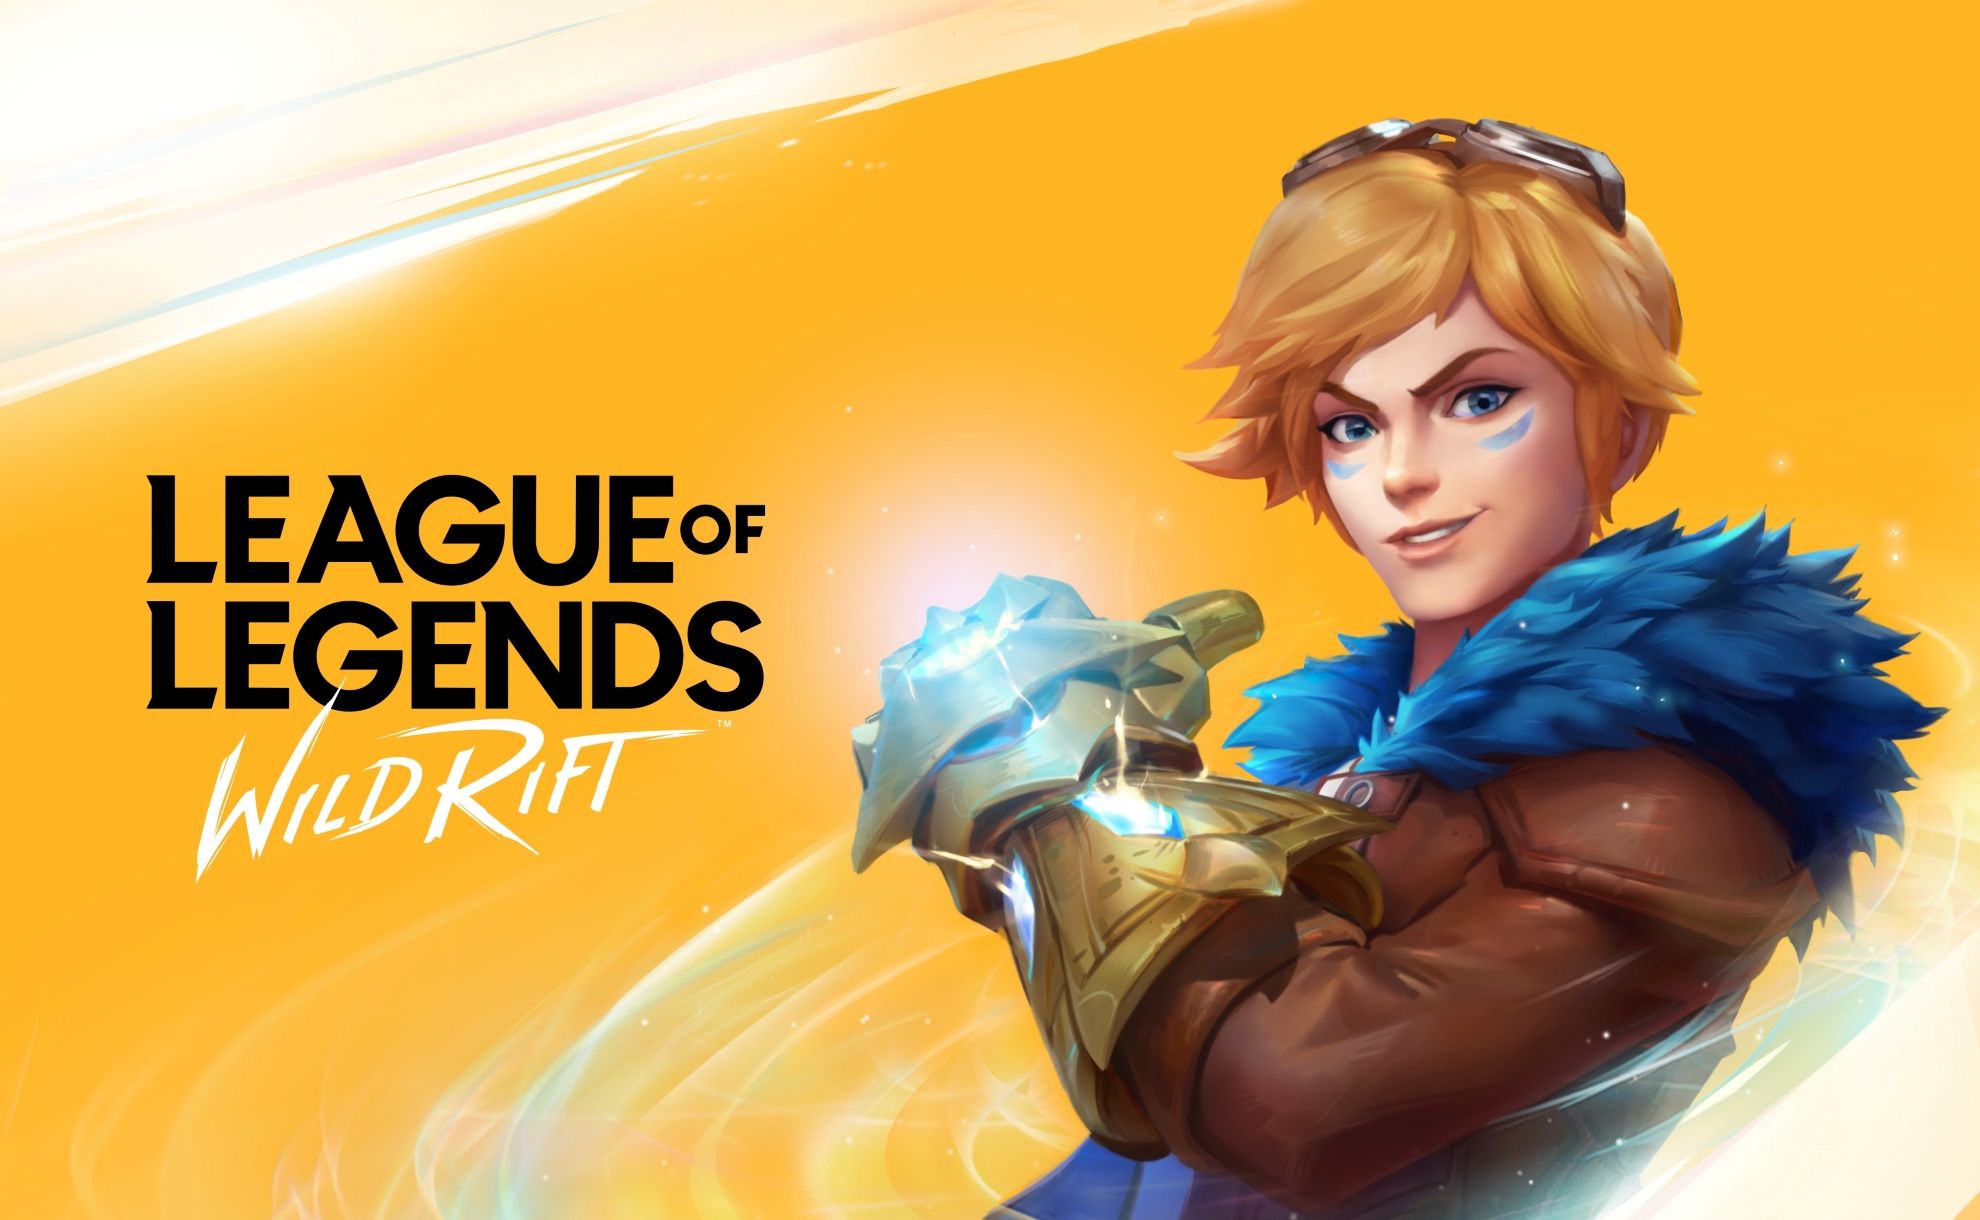 League of Legends: Wild Rift image with Ezreal on it